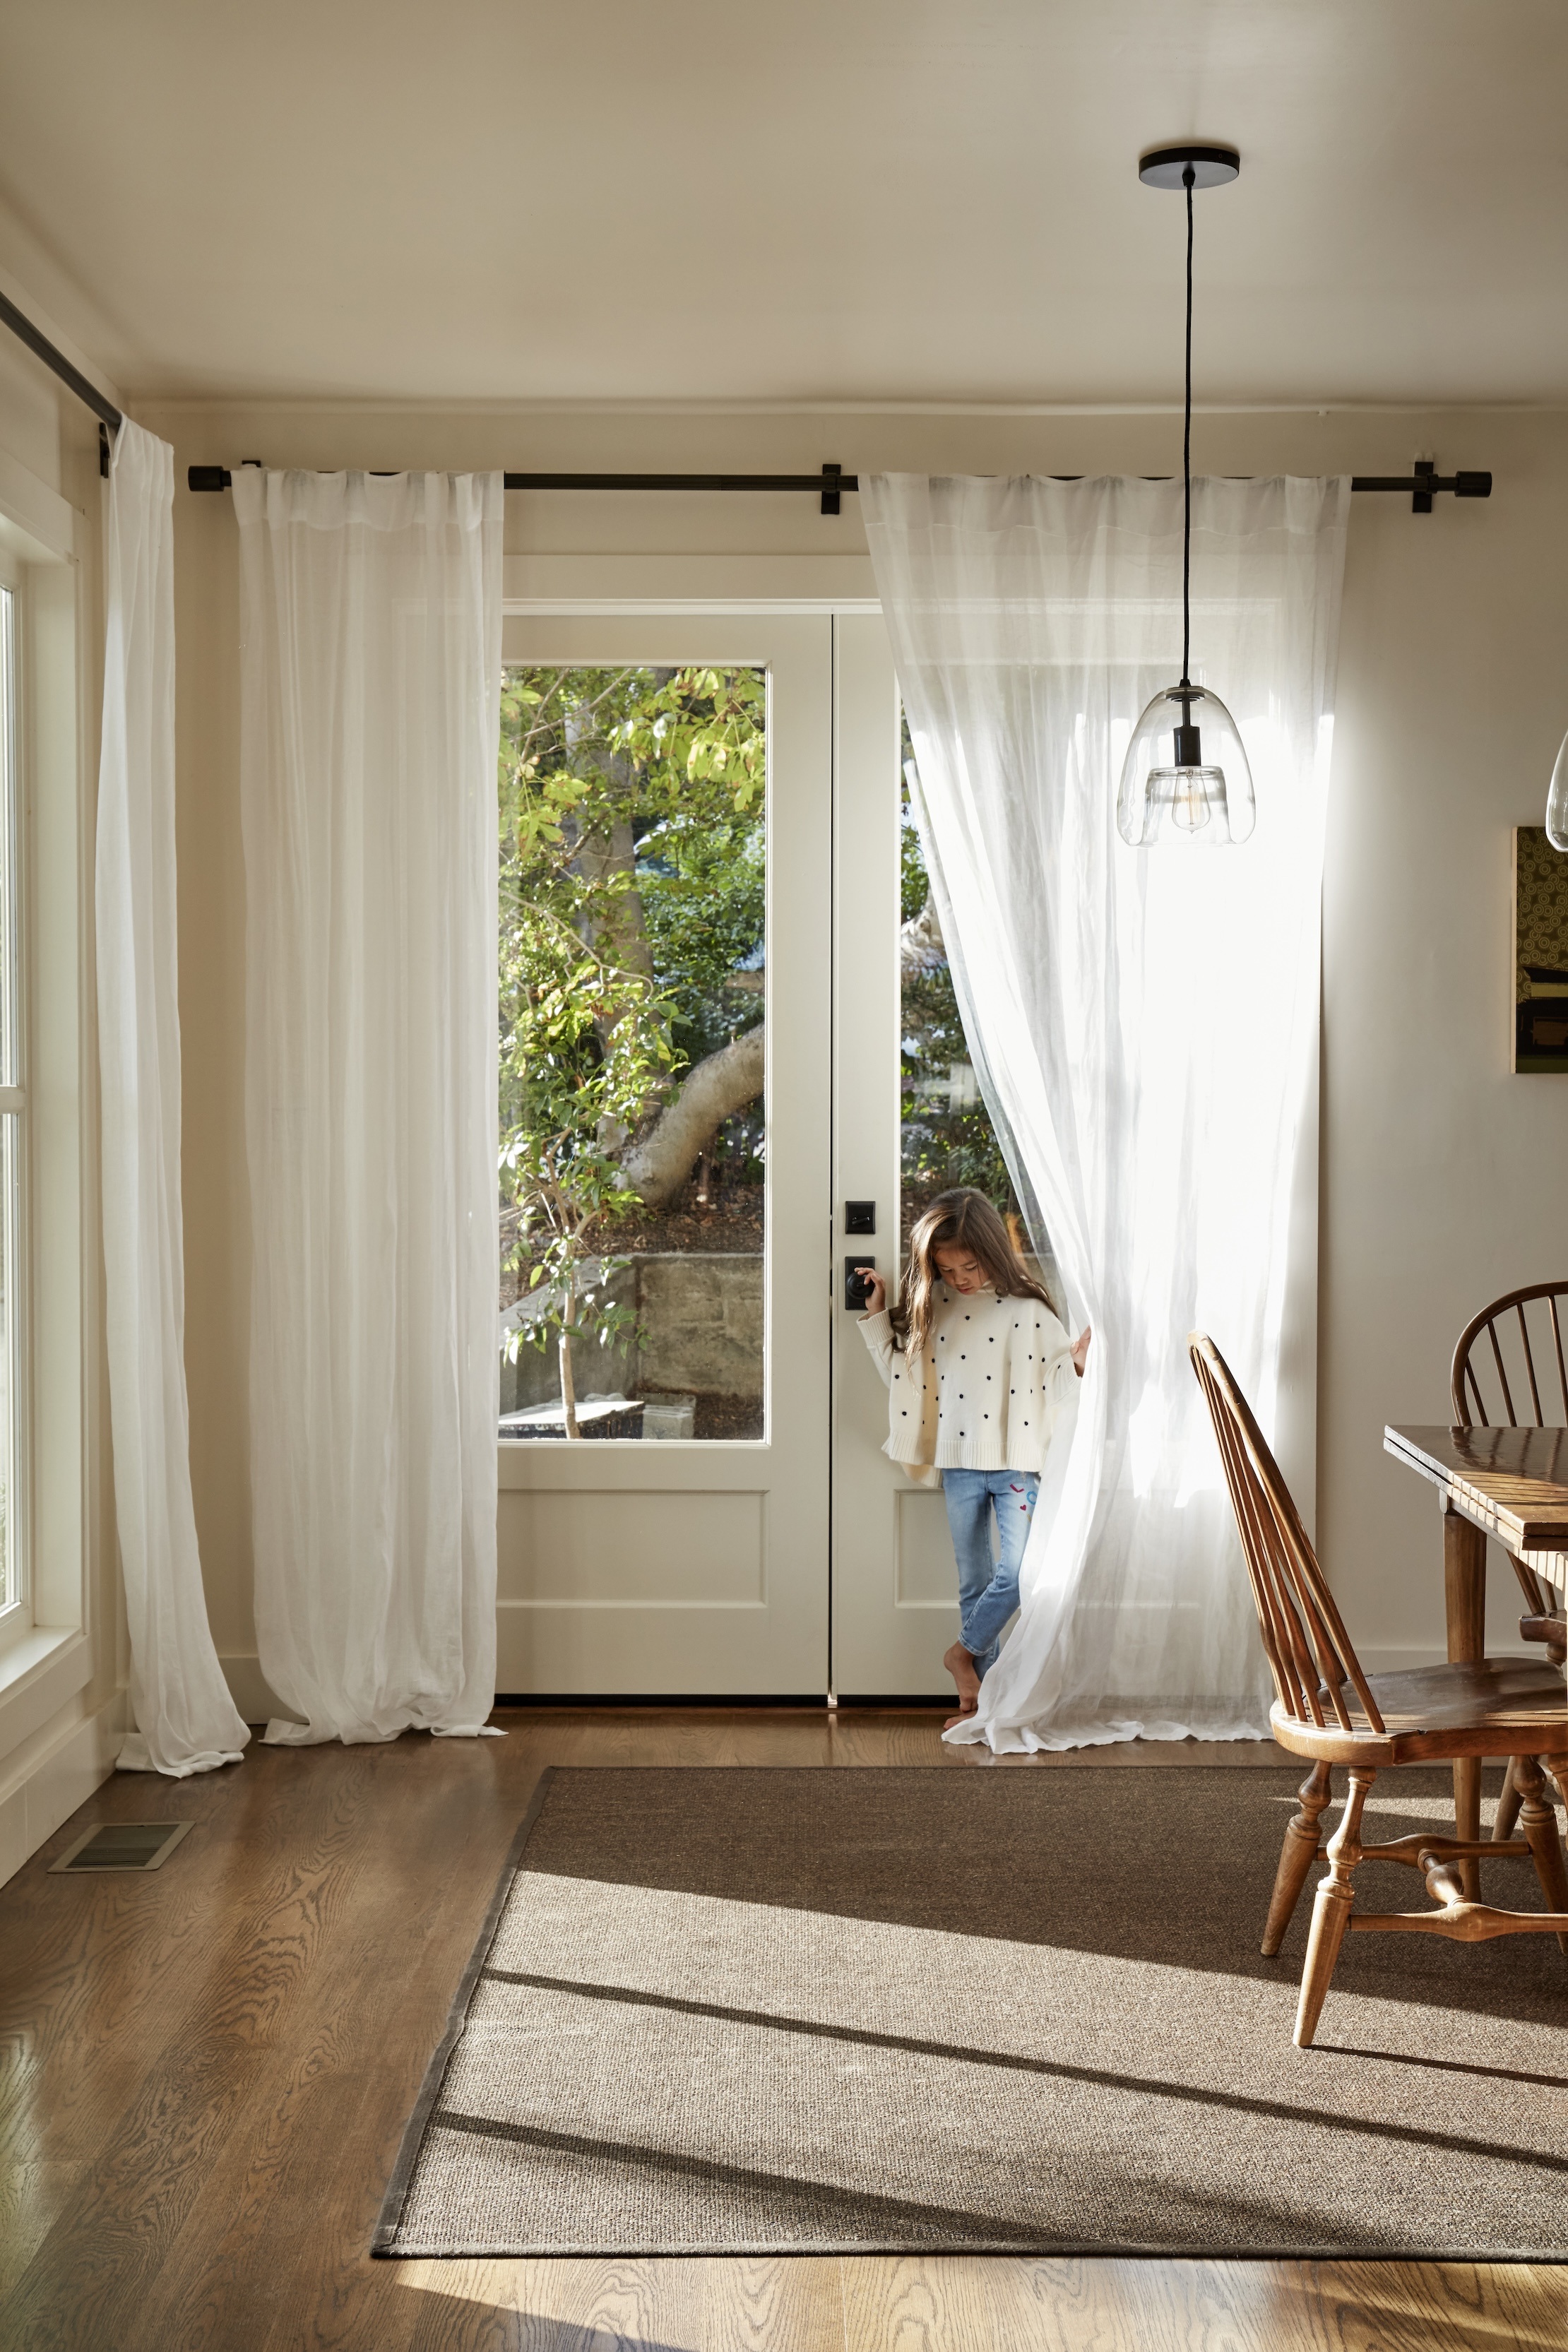 Backdoor With Sheer Curtains Letting In Light